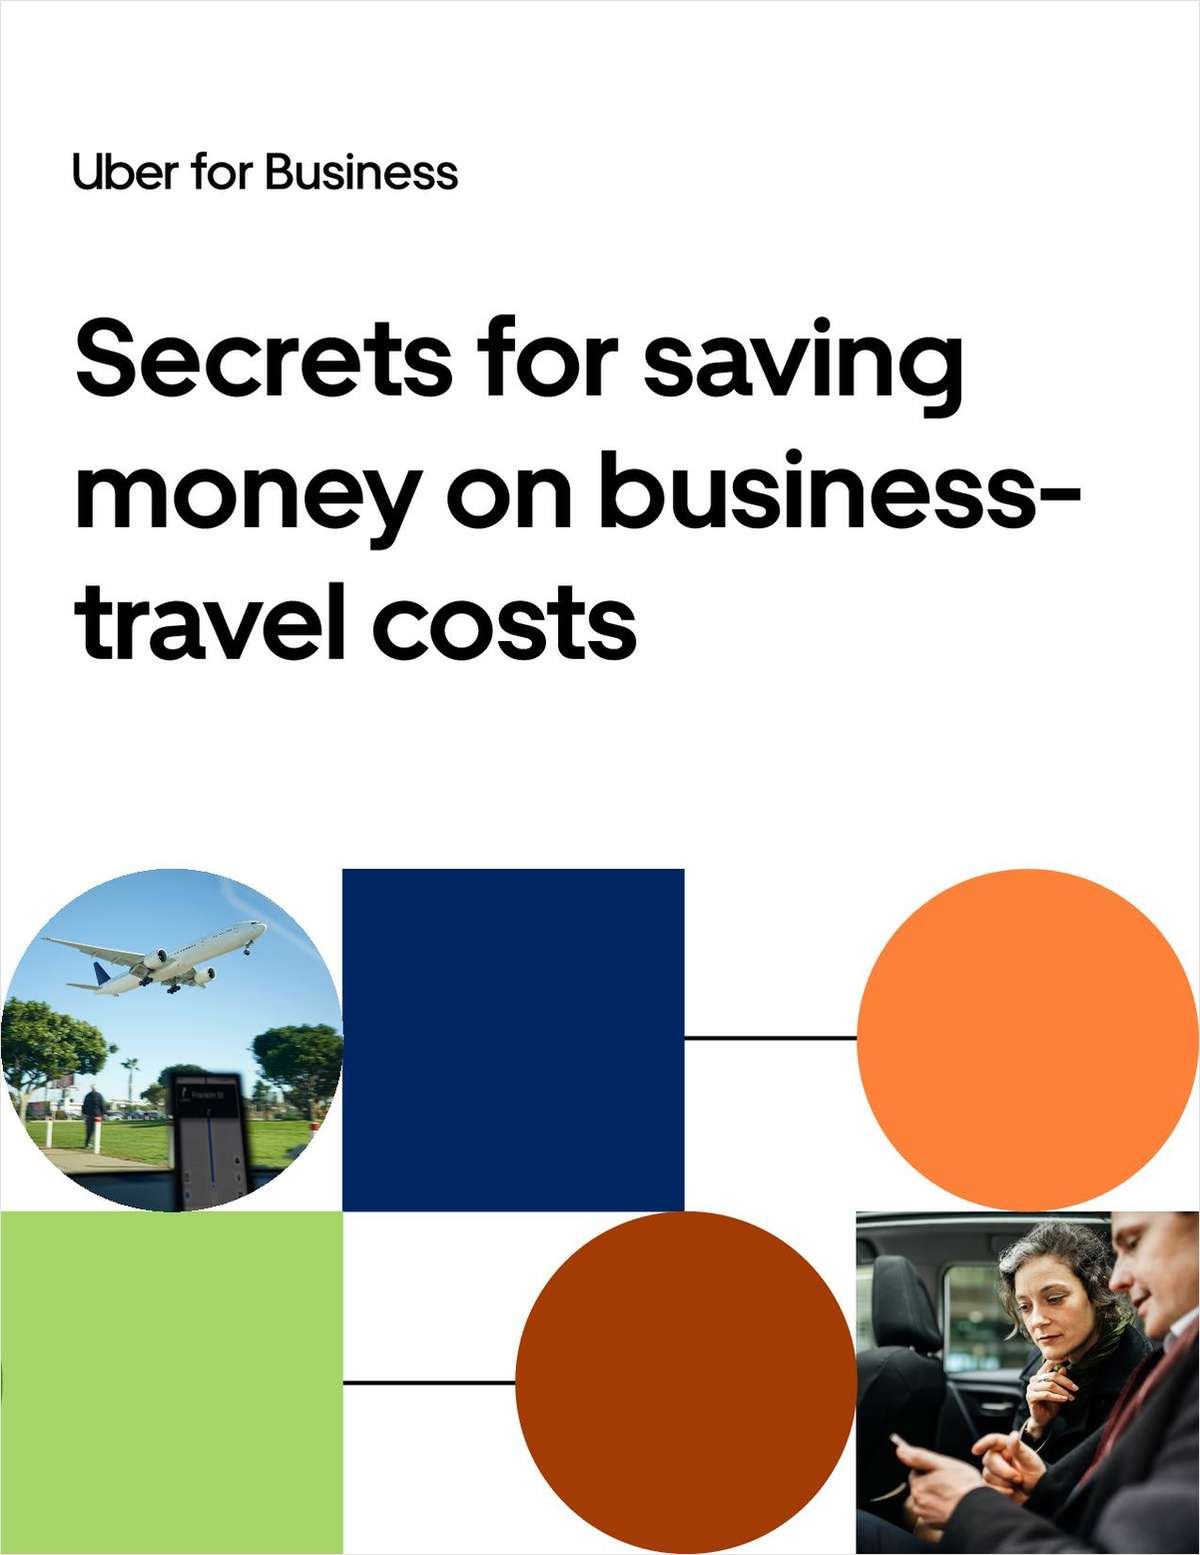 Secrets for Saving Money on Business Travel Costs